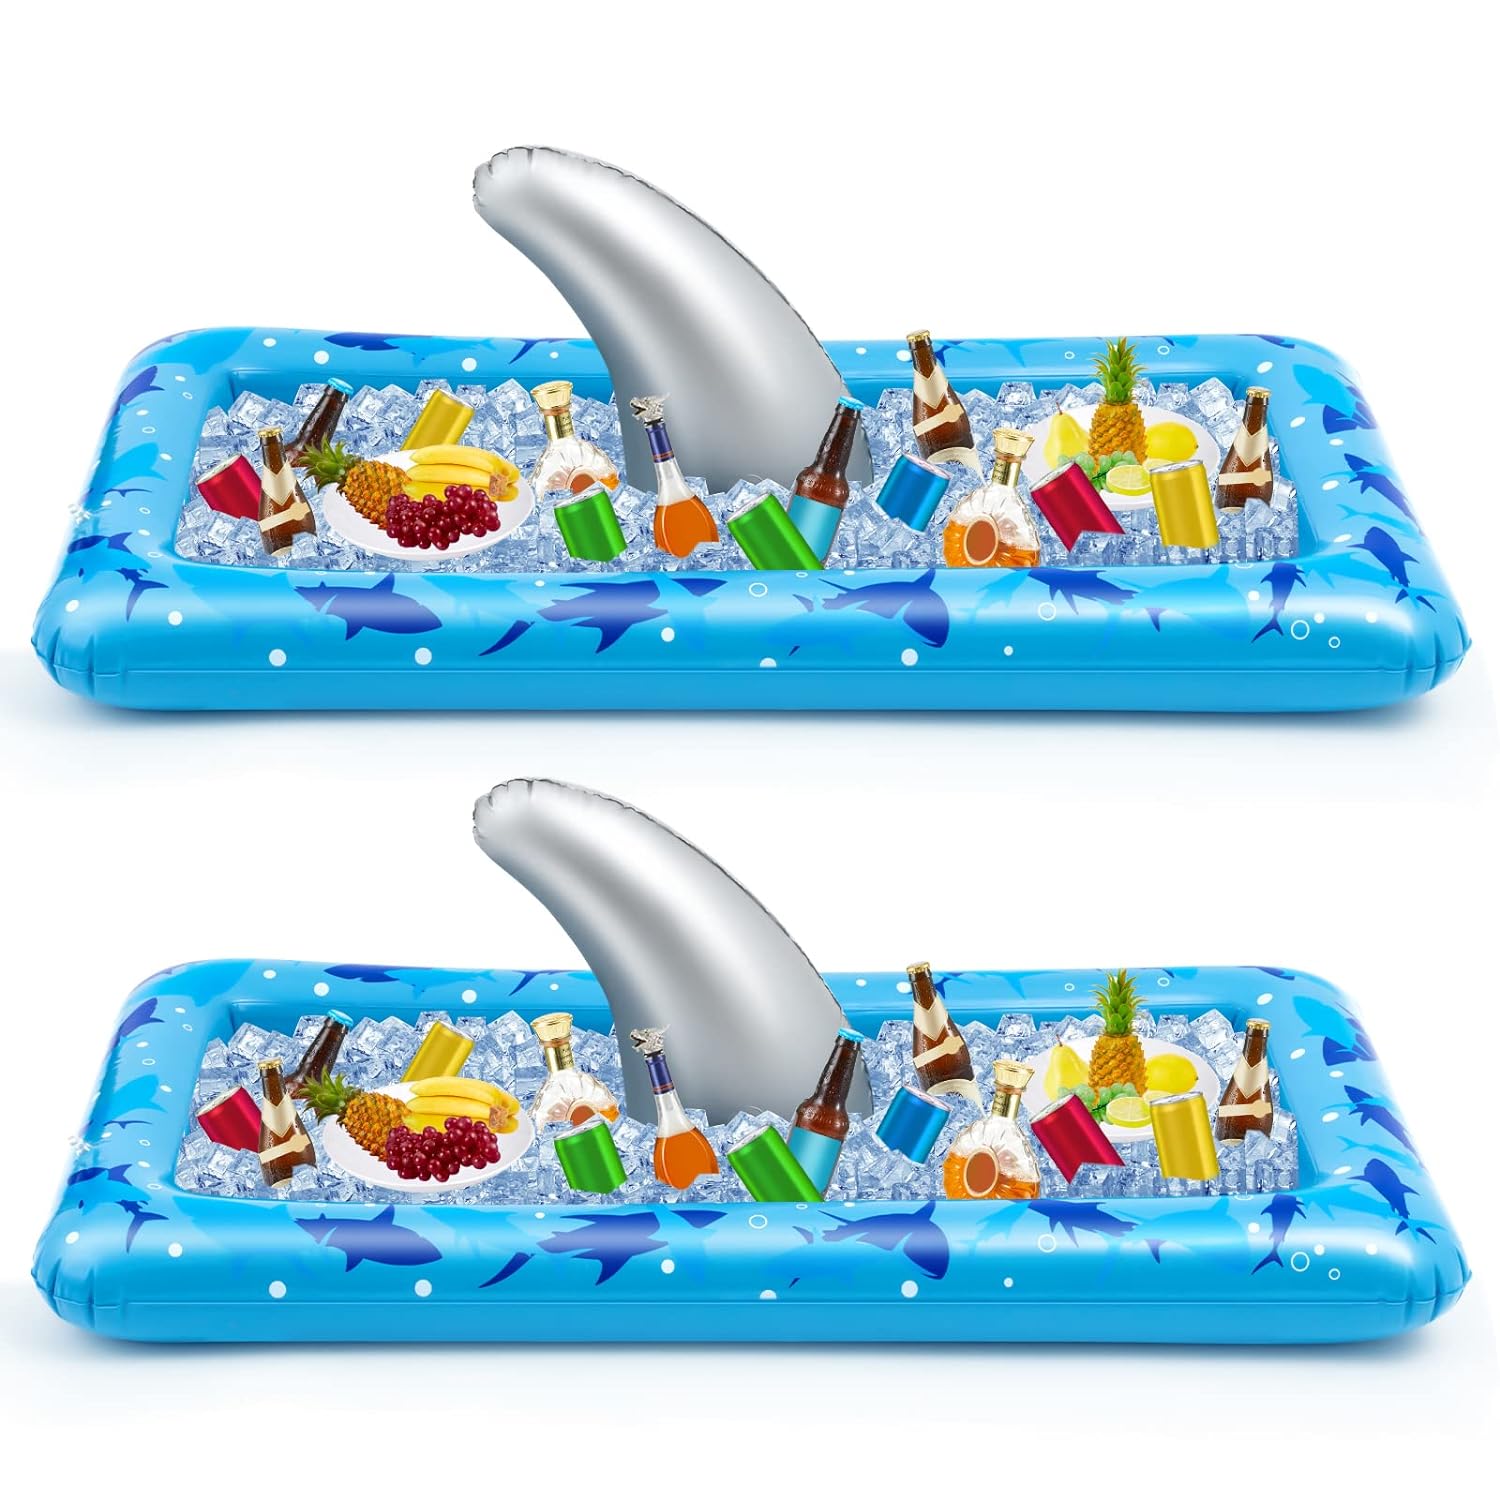 Great Choice Products 2 Pieces Shark Party Buffet Cooler Inflatable Serving Bar Inflatable Cooler Cold Food Buffet Server Serving Tray Food Dr…